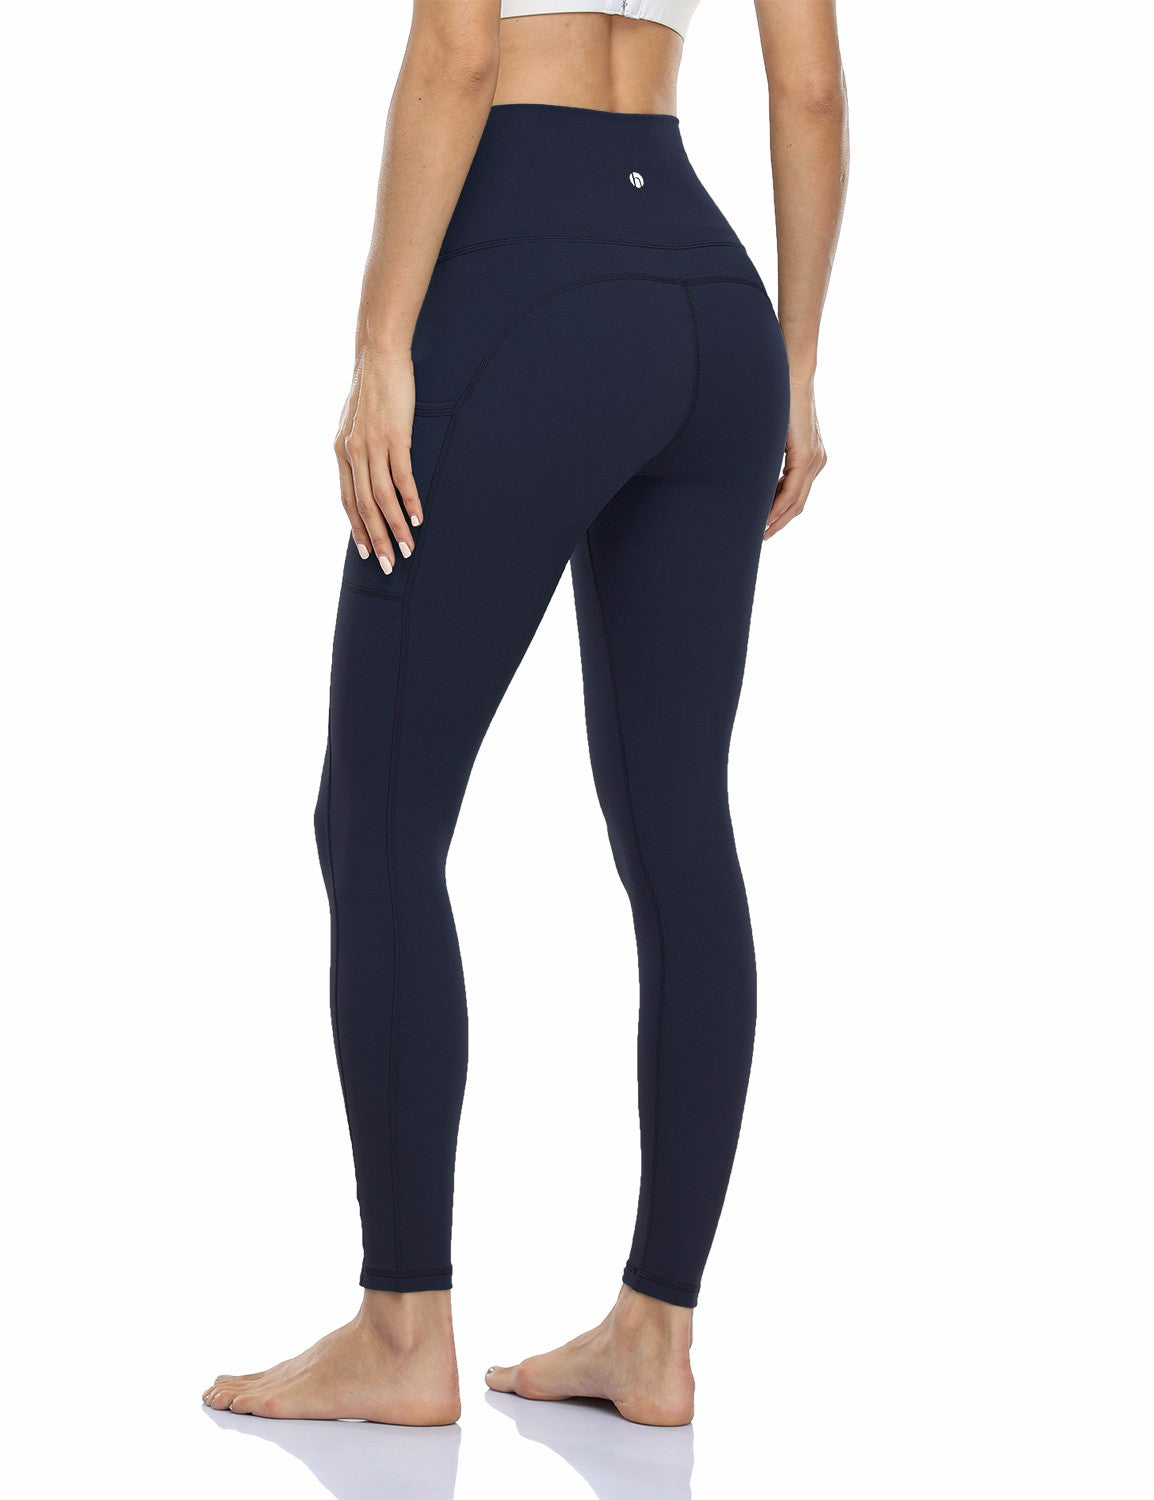 Heynuts Women's Pants On Sale Up To 90% Off Retail